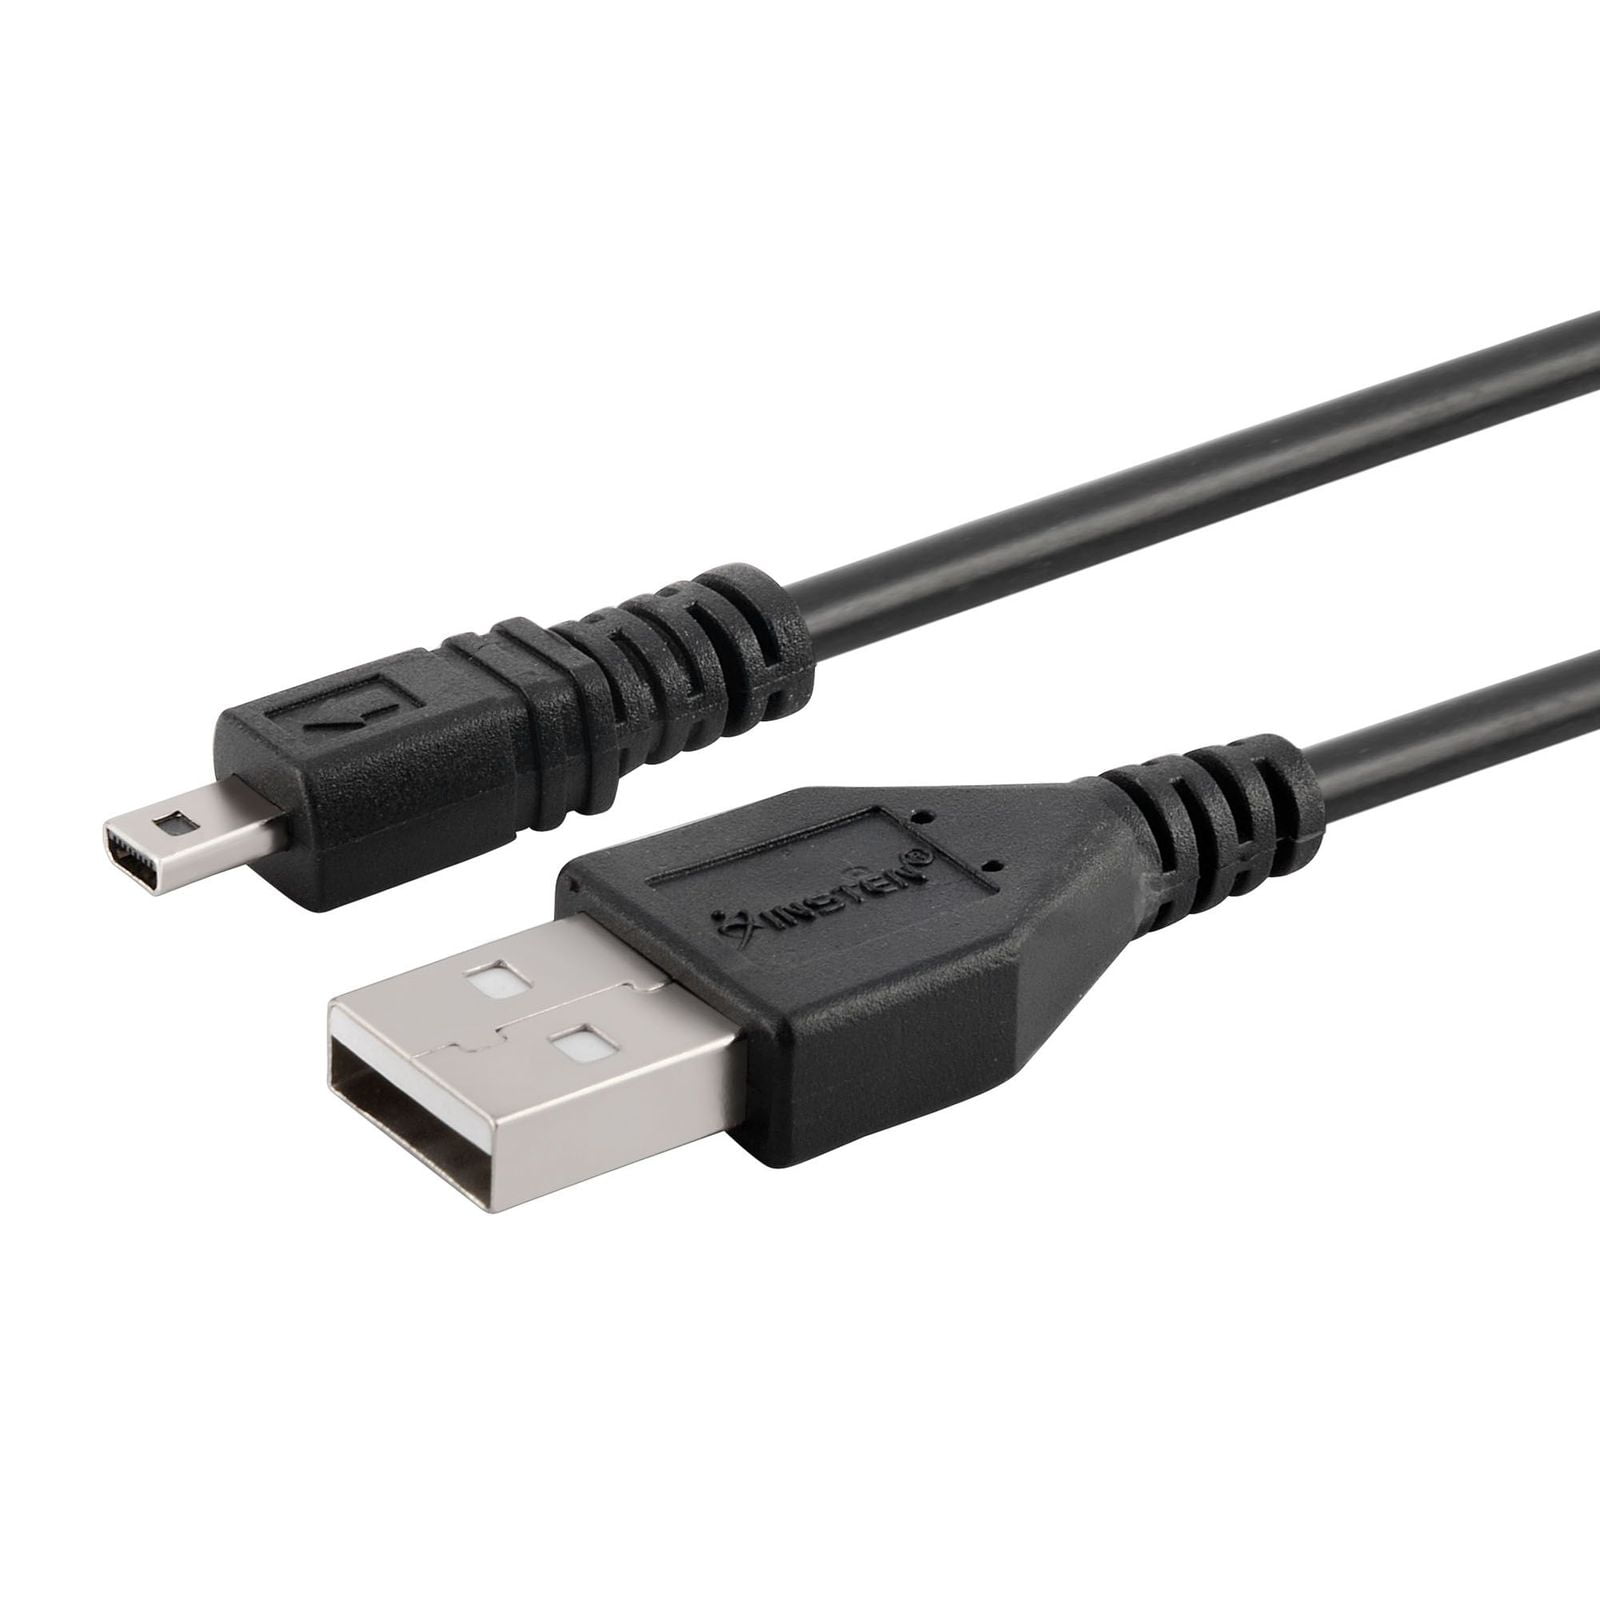 UC-E6 Replacement USB Cable for Nikon 